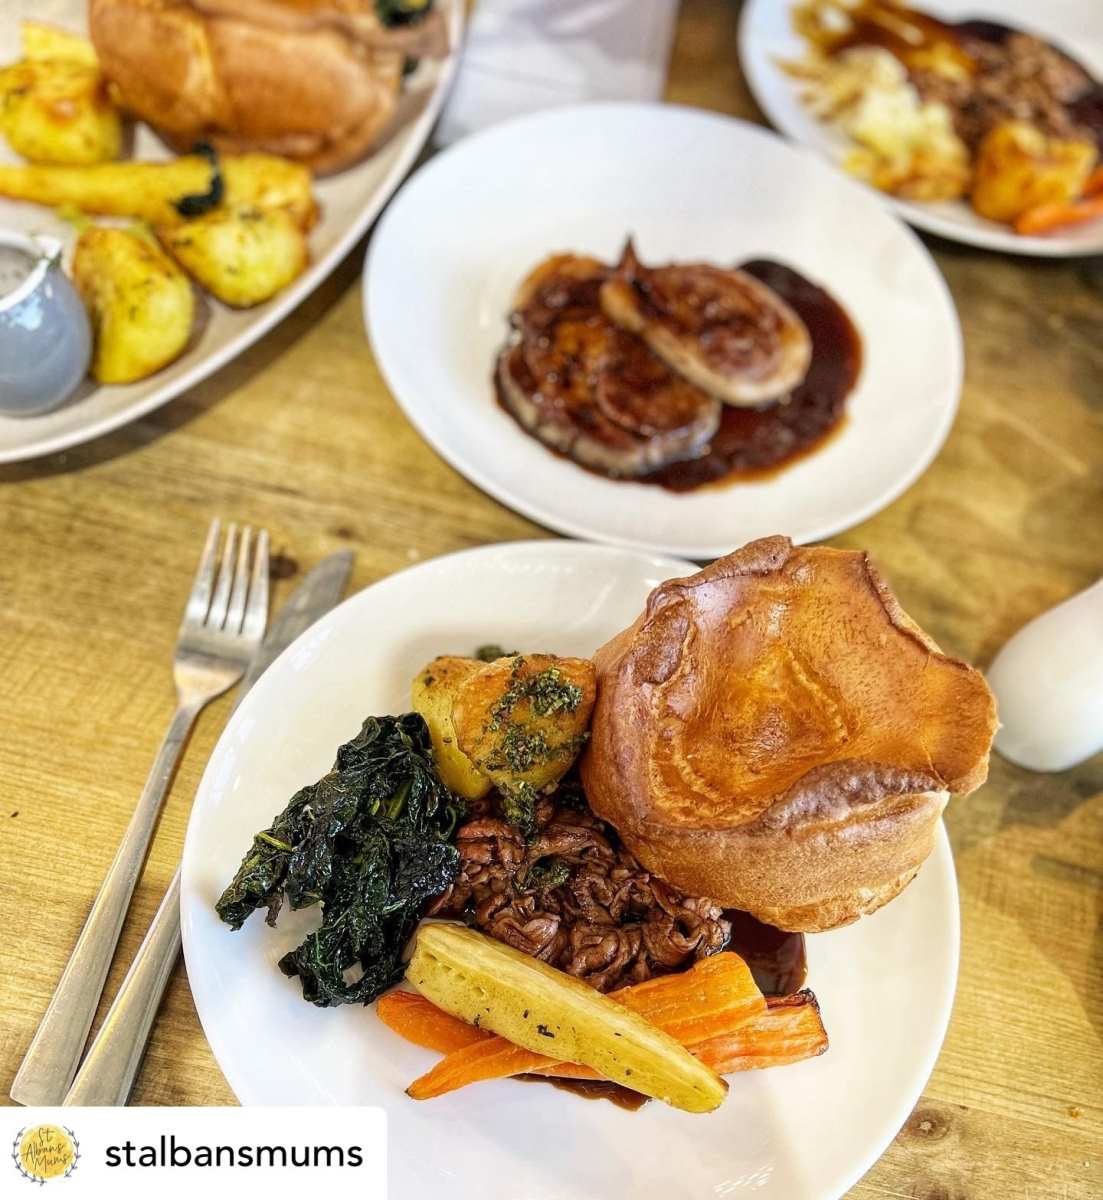 Our Sunday roasts are back for the autumn and winter! Photograph